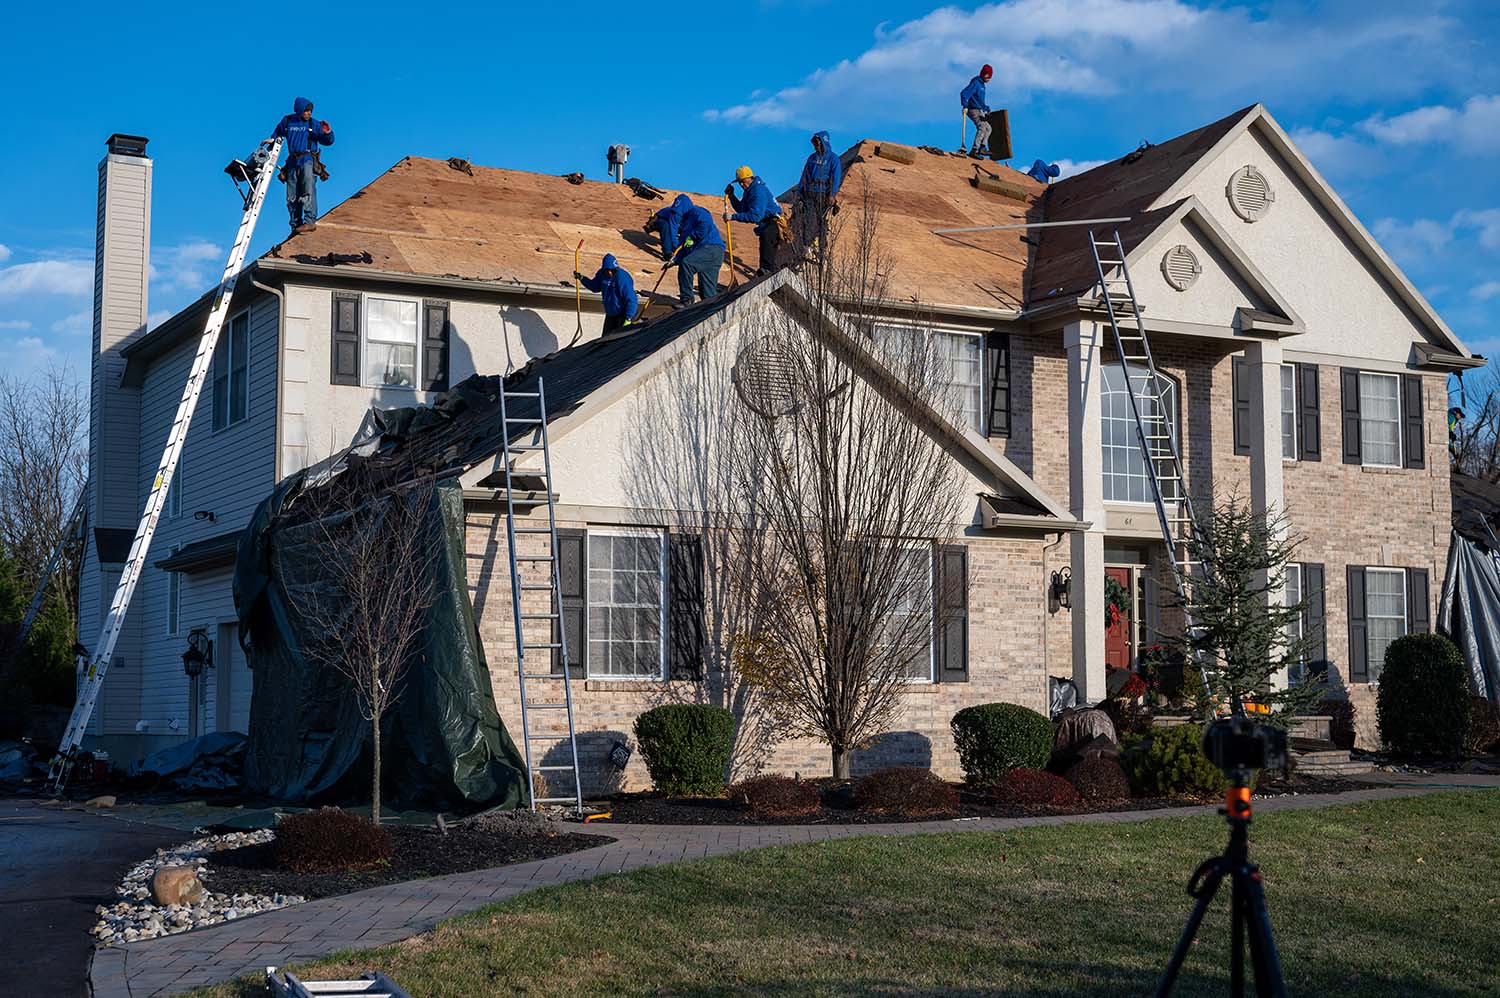 Roofing repair company - residential roofing contractors in Cherry Hill (medium image)